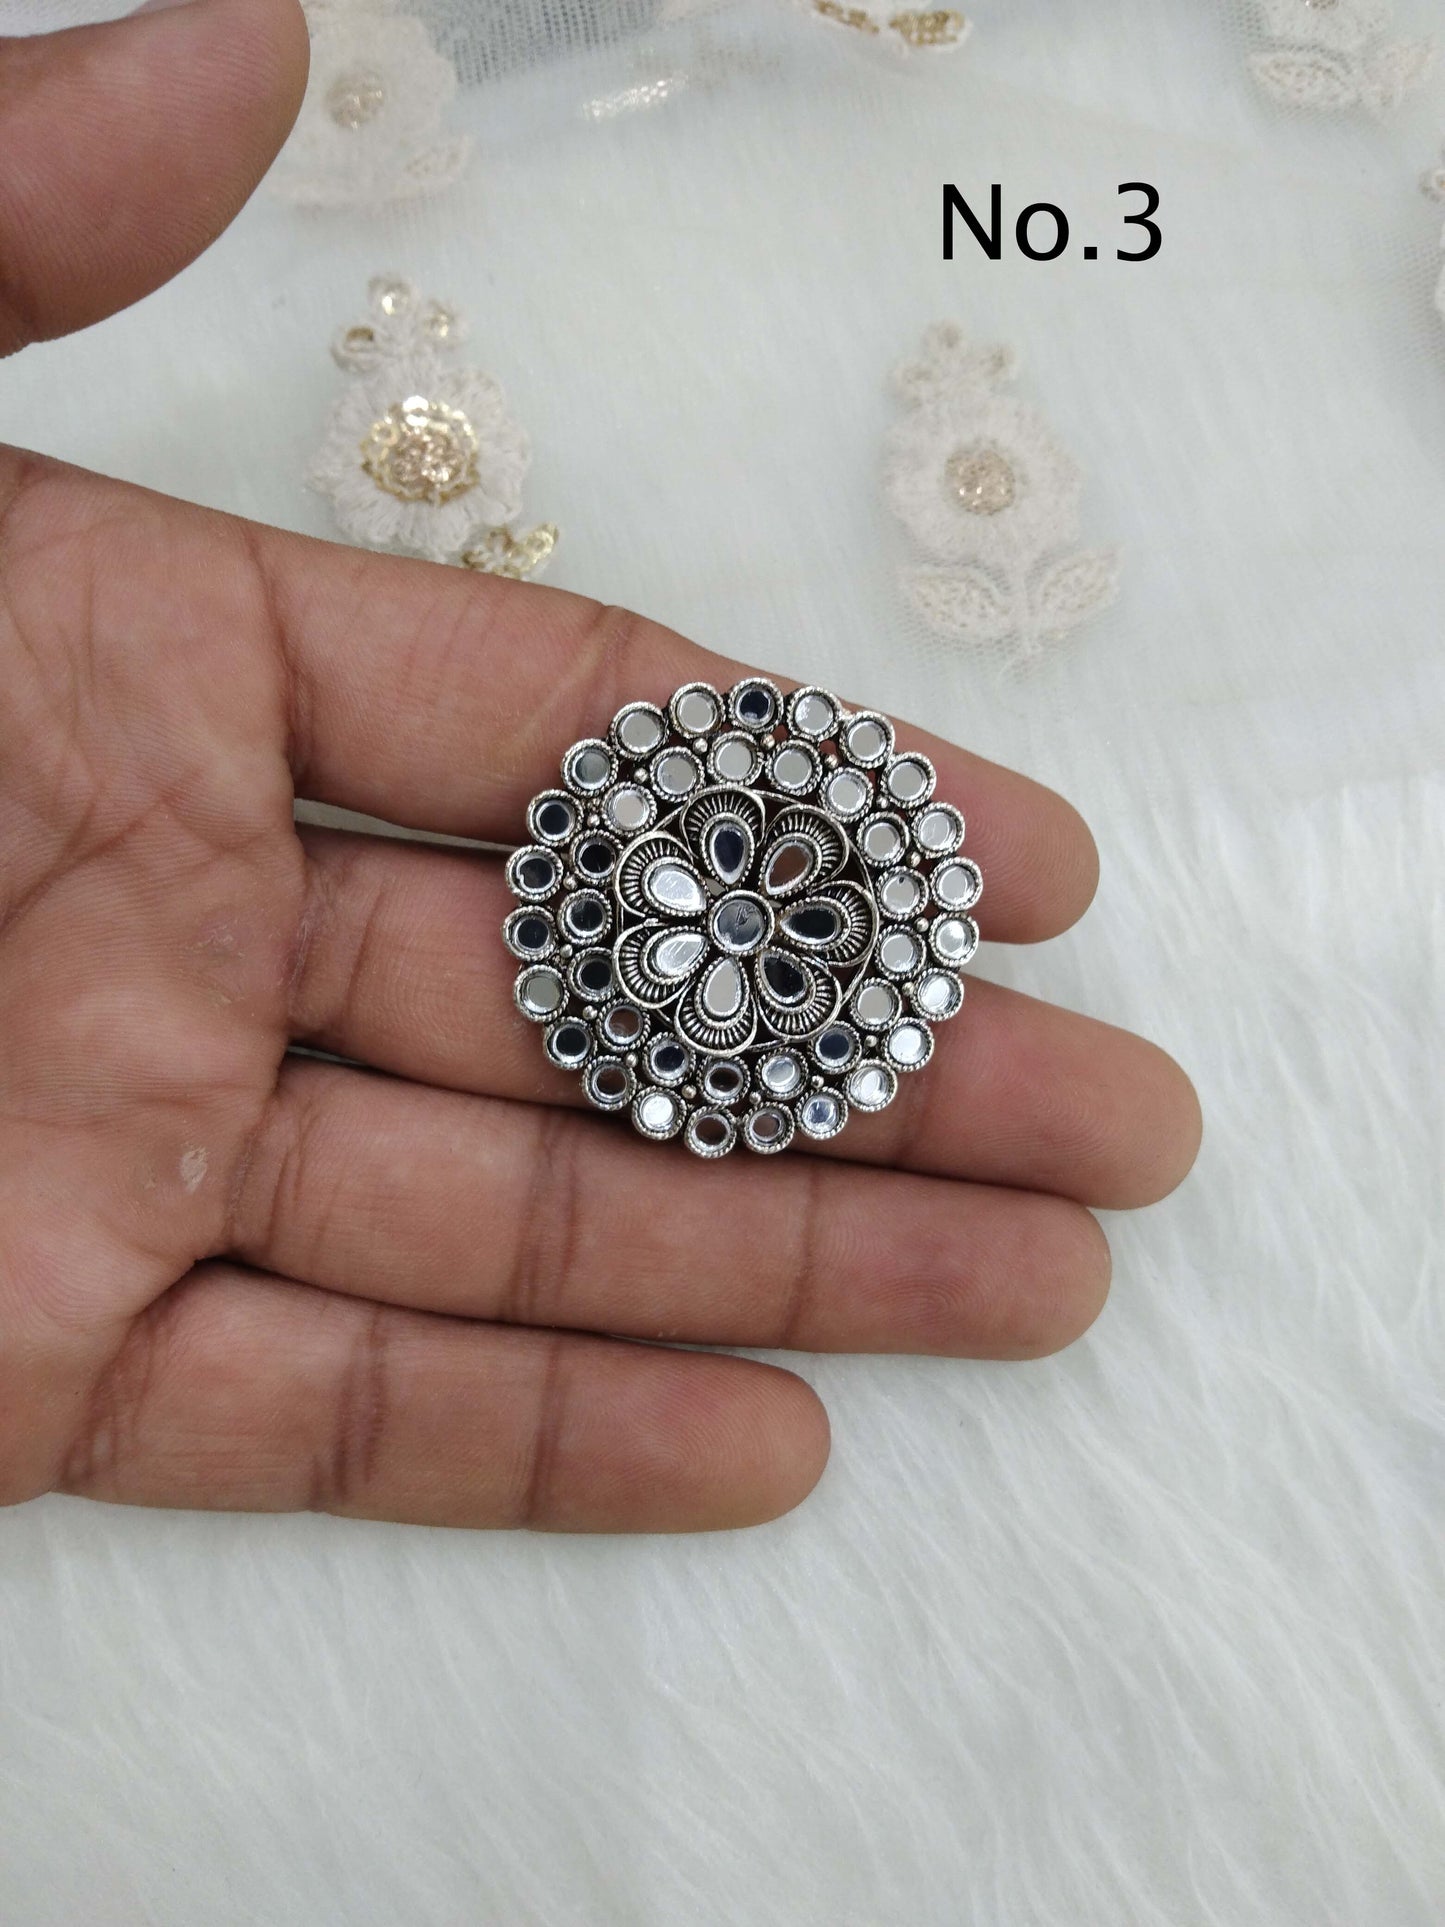 Indian Ring /Antique finish mirror Finger rings round bridal ring hand accessory/hsi